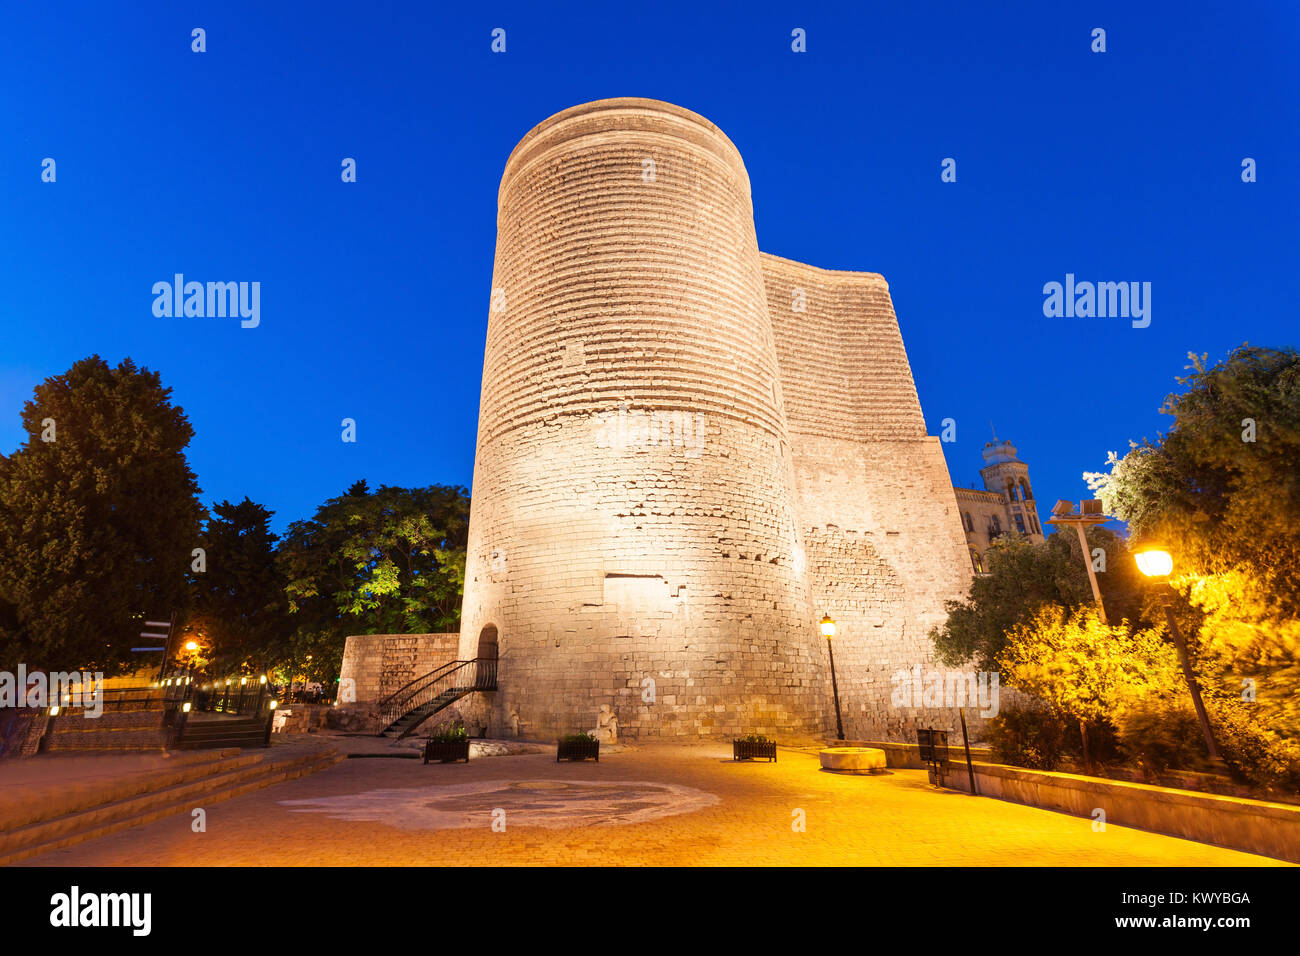 The Maiden Tower at night. It is also known as Giz Galasi and located in the Old City in Baku, Azerbaijan. Stock Photo